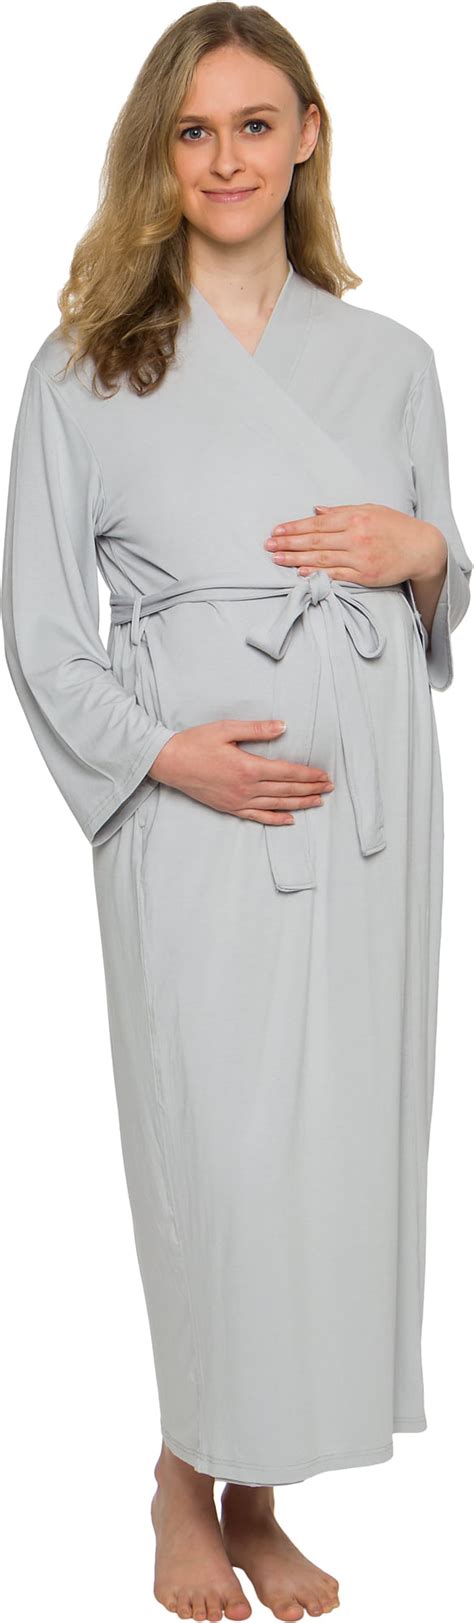 Full Length Maternity Kimono Robe Lightweight Labor And Delivery